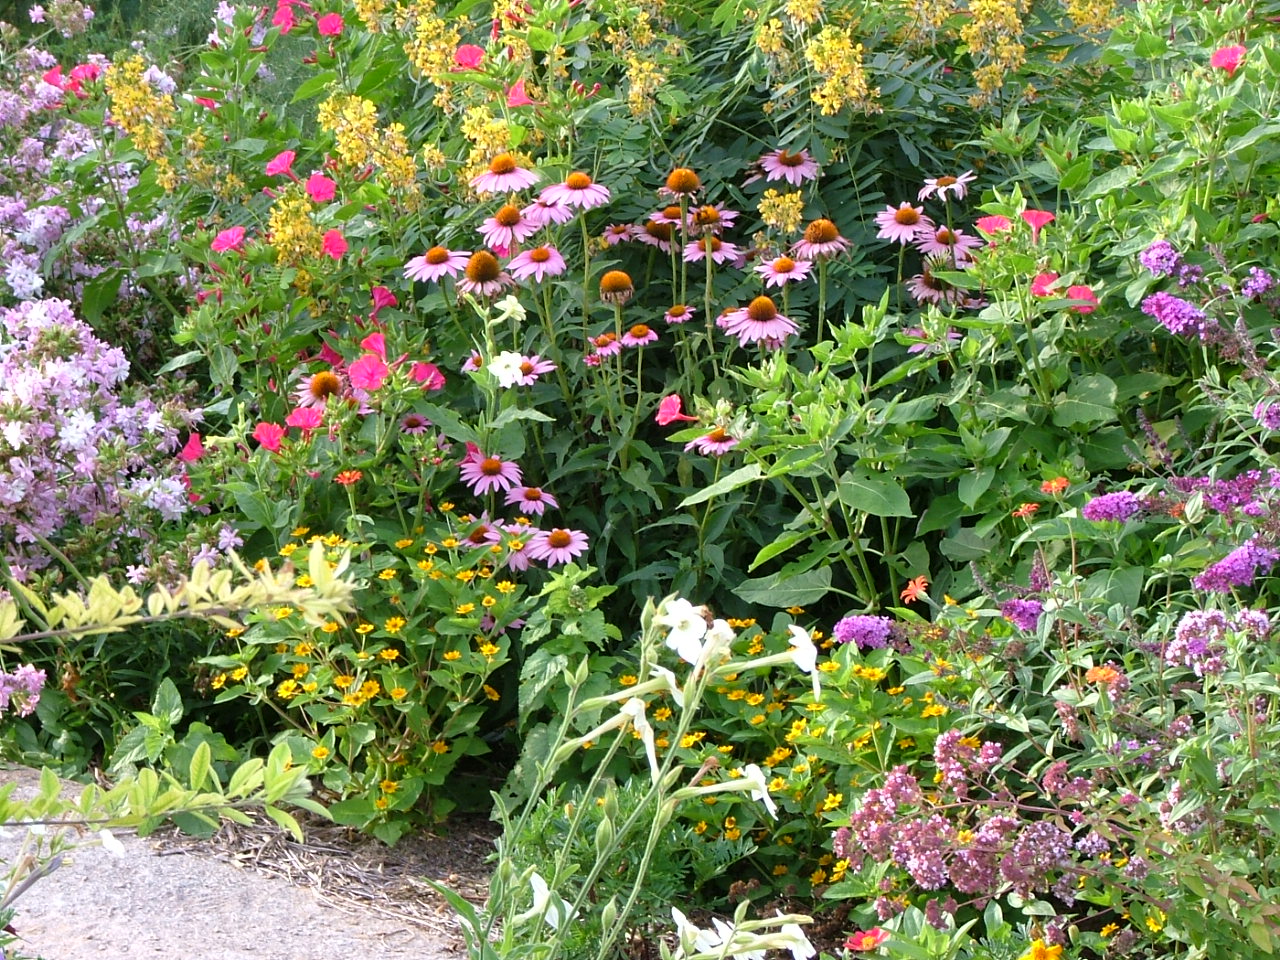 A diversity of flowers, including purple coneflower and partridge pea, fill this flower border